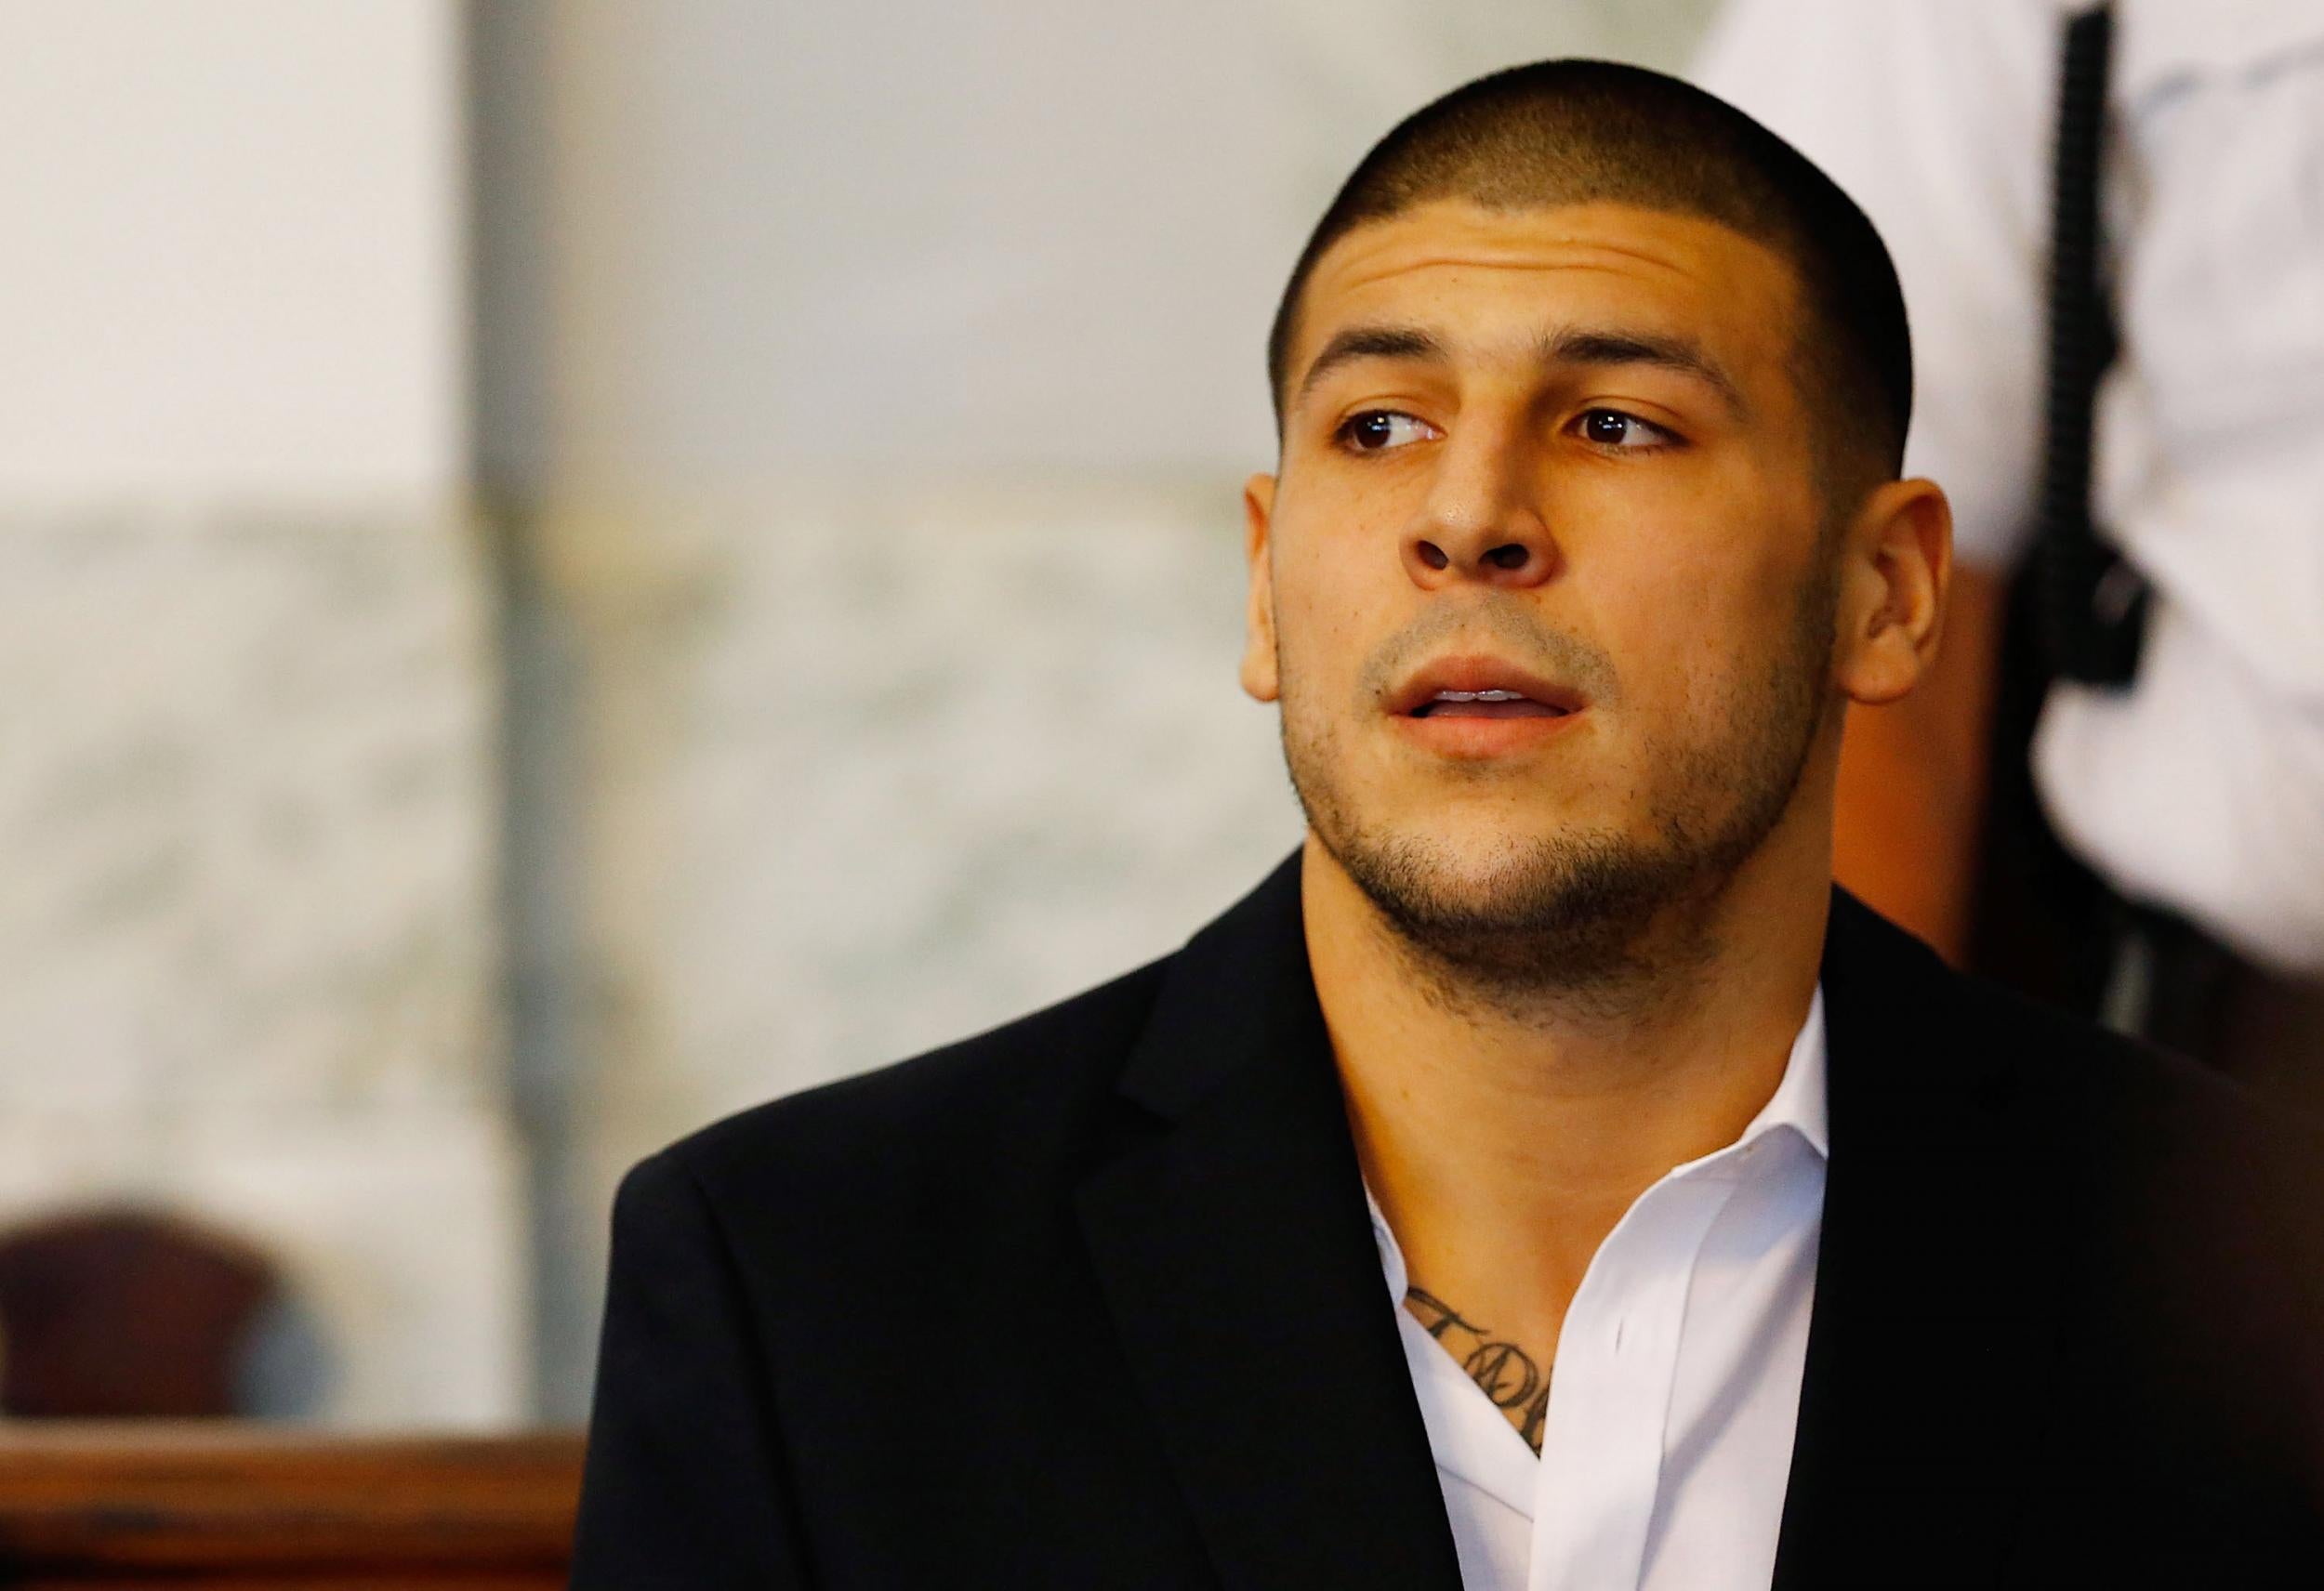 Aaron Hernandez killed himself in prison in April where he was serving a life sentence for murder